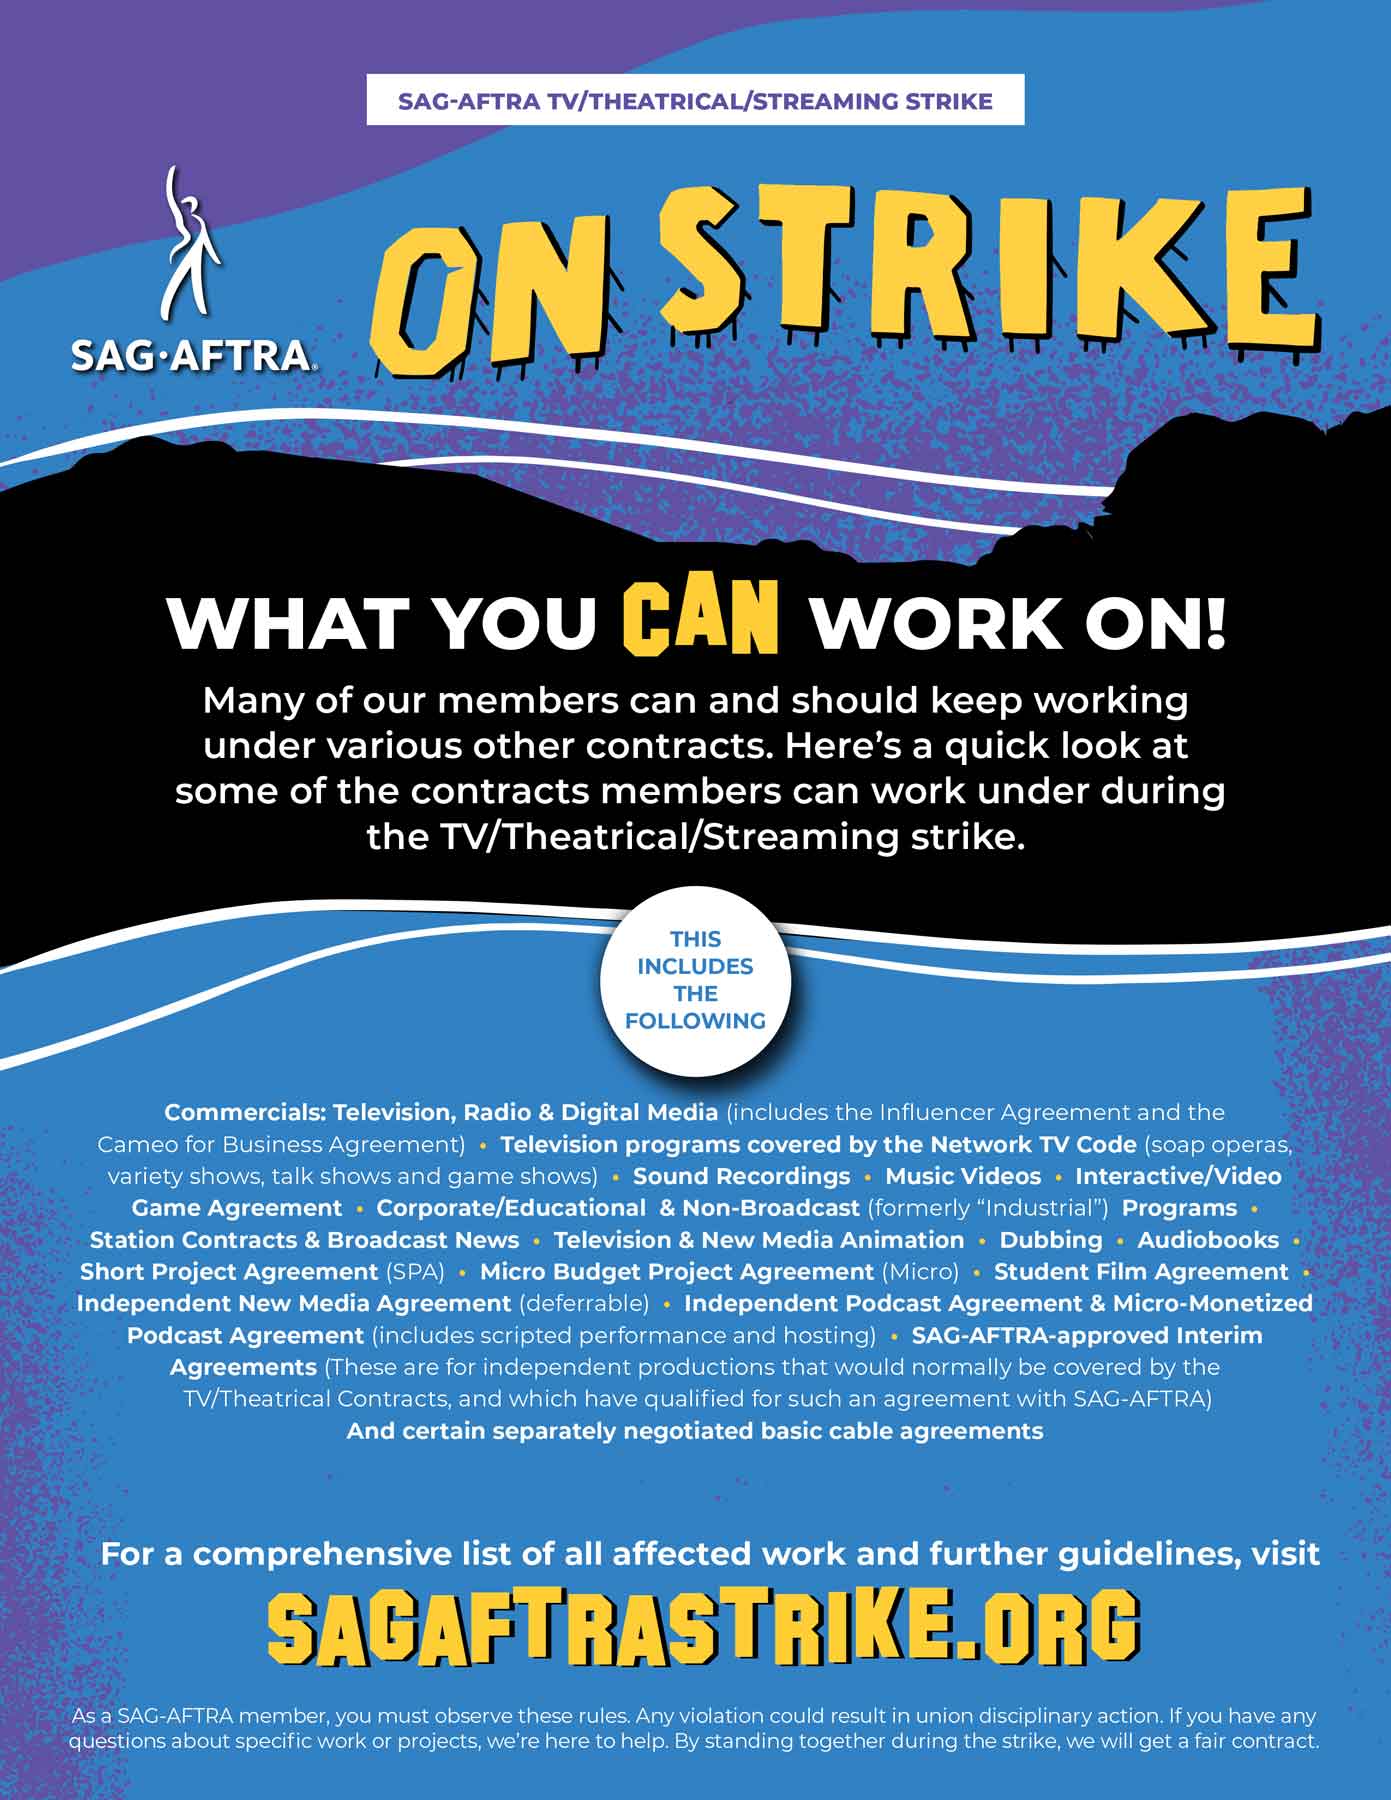 What projects can SAG-AFTRA members still work on?